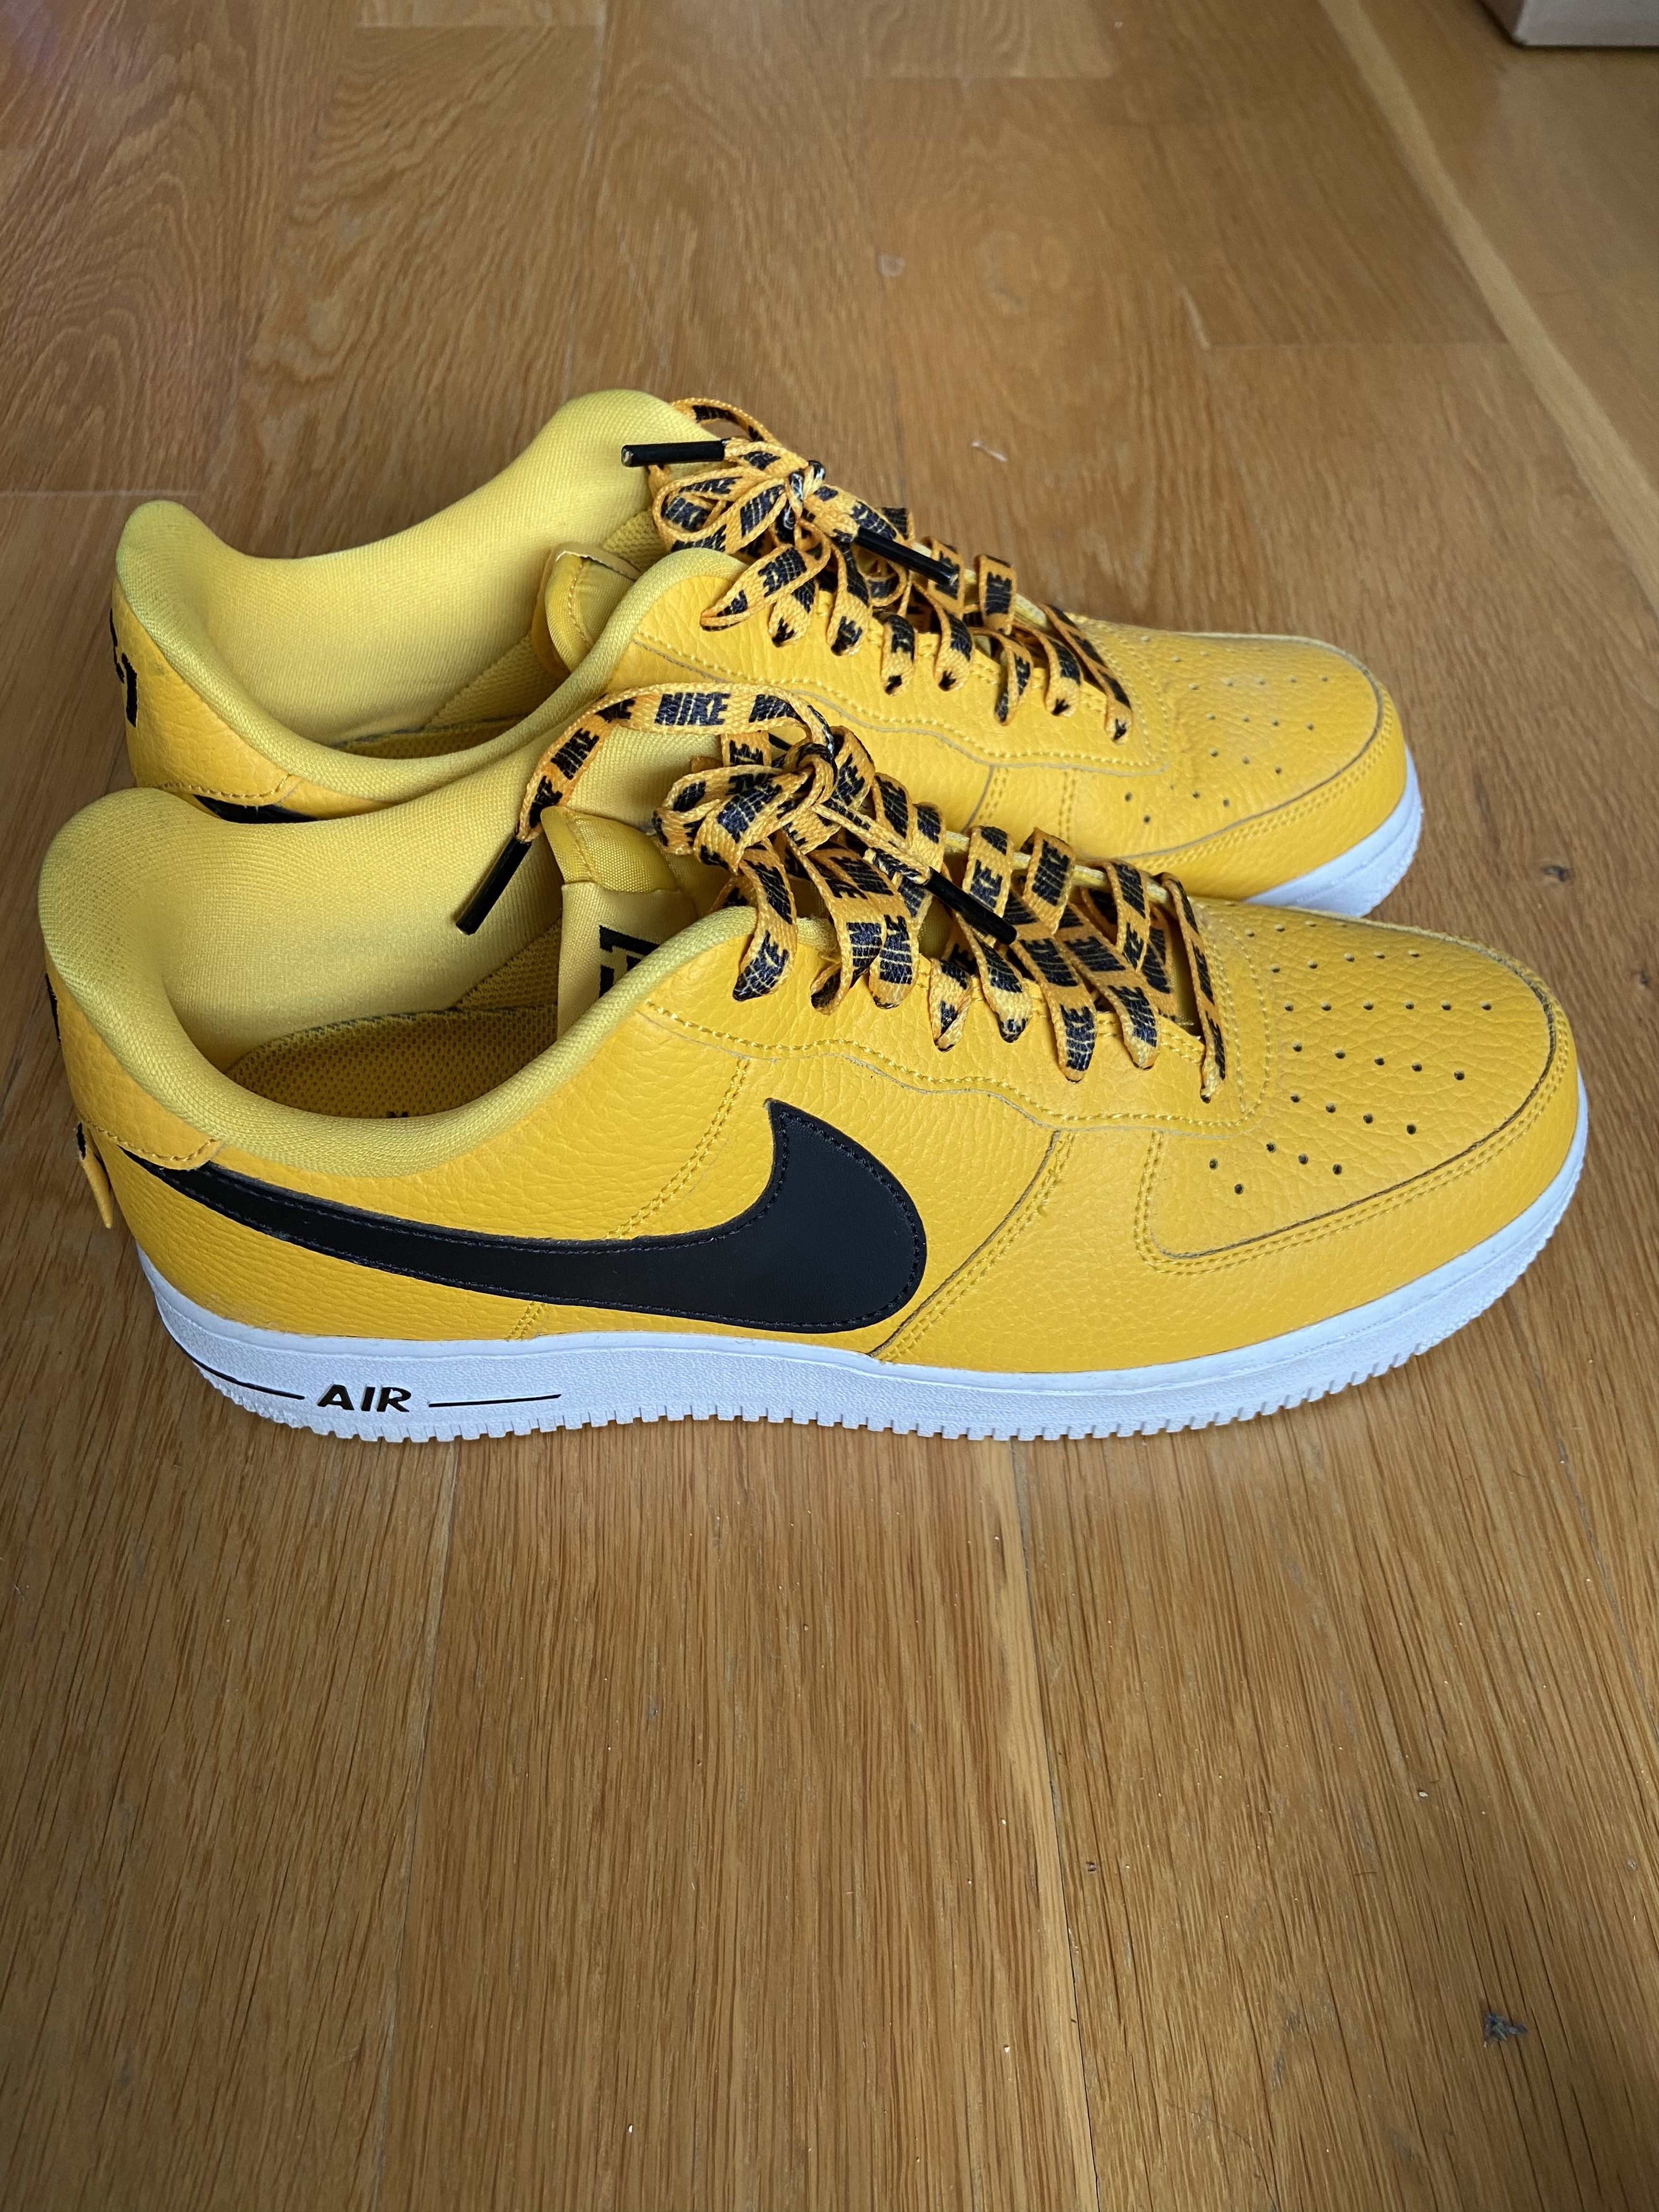 Nike Air Force 1 Low Yellow NBA Edition Size US 8 / EU 41 - 1 Preview